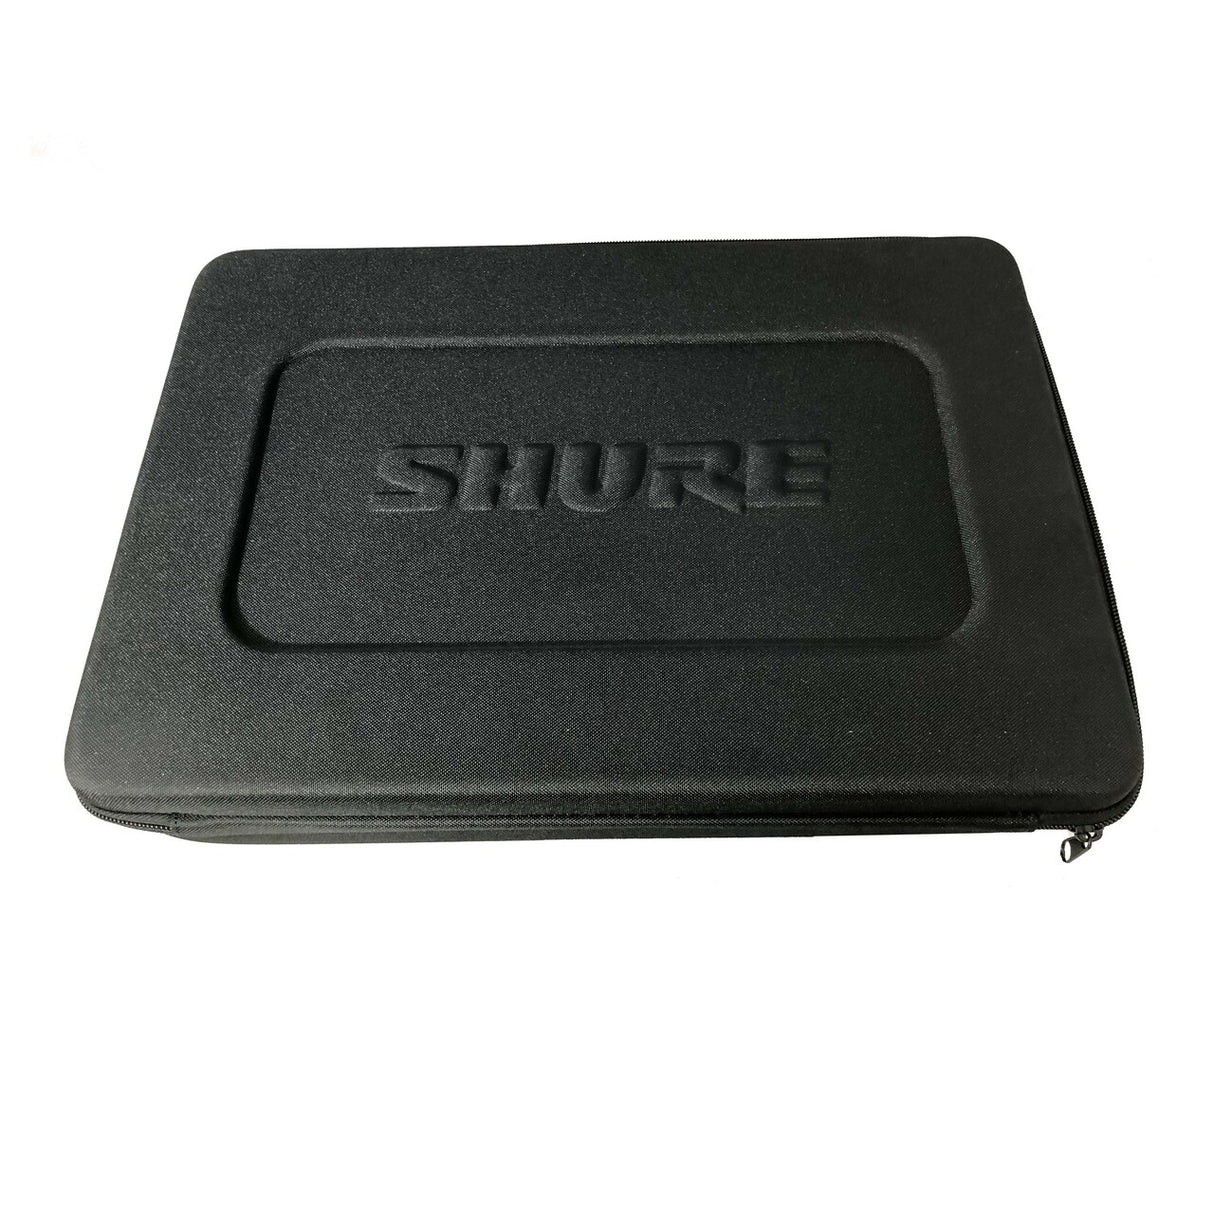 Shure 95E16526 Wireless System Case for PGXD, GLXD and Some BLX Systems with Bodypack Transmitters